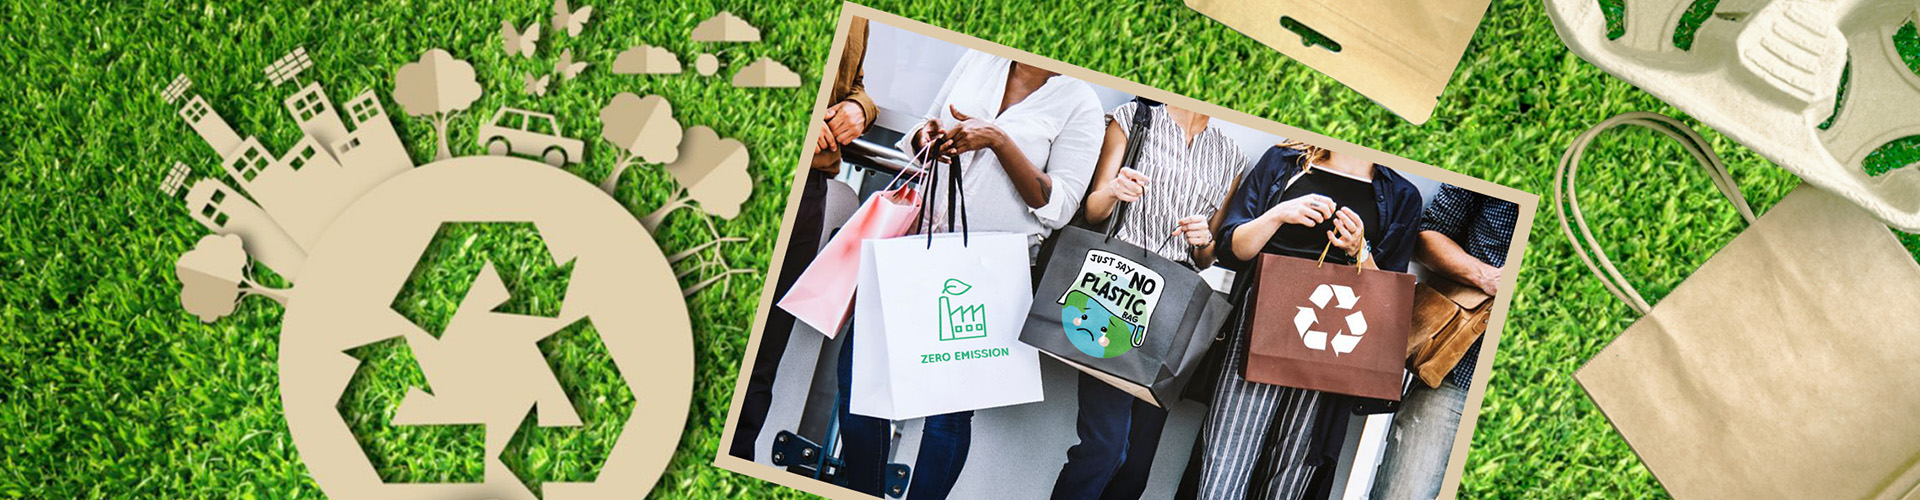 Recycling and sustainability retail banner